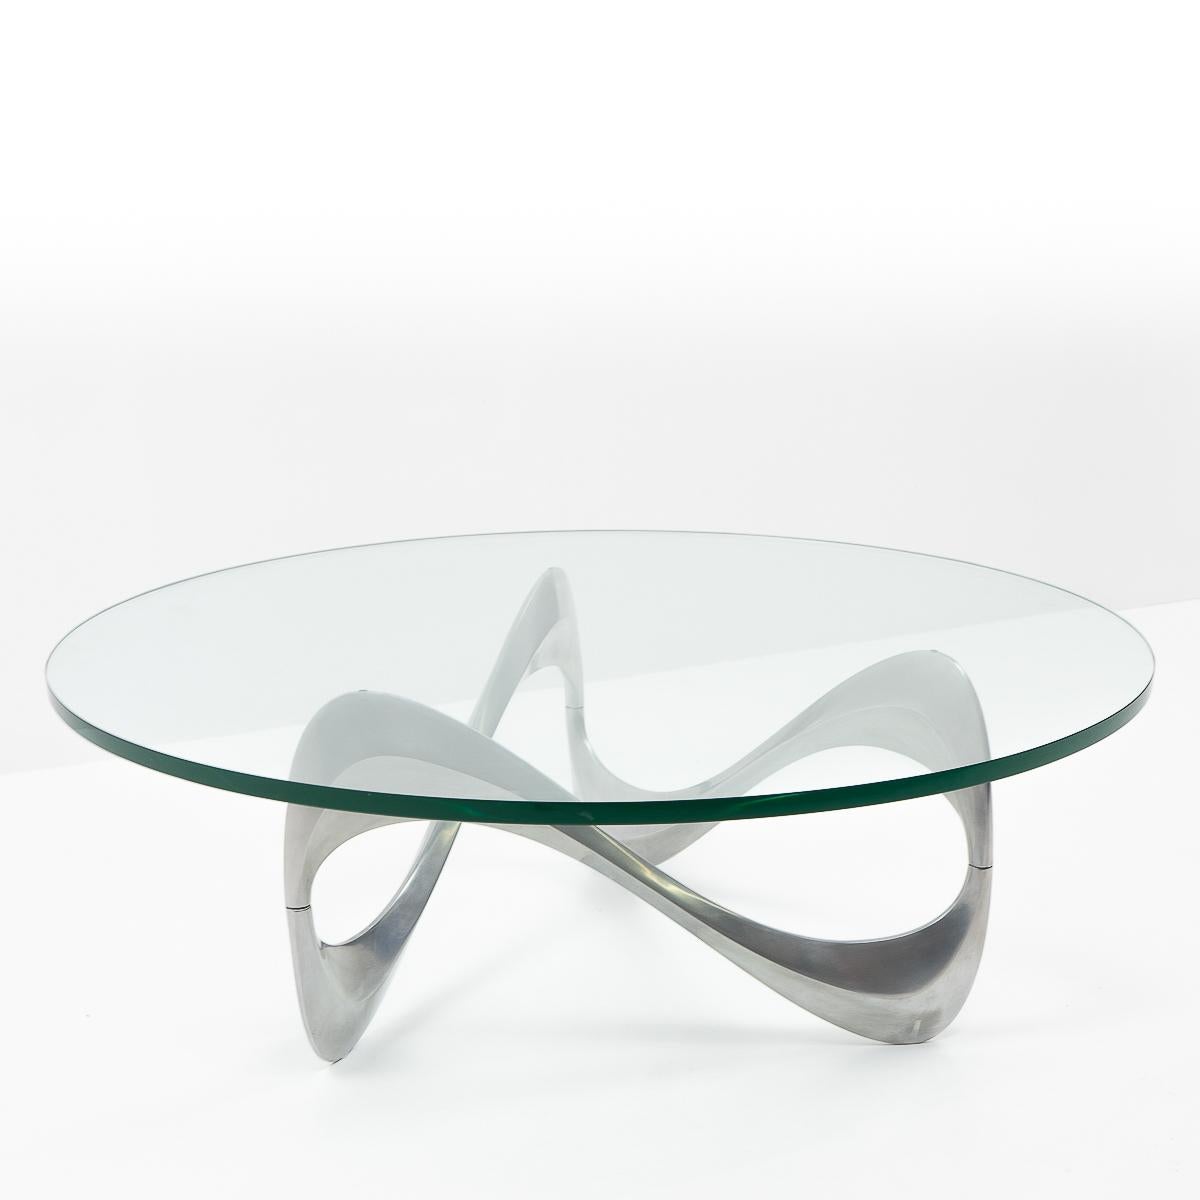 Sculptural round coffee table designed by Kurt Hesterberg, produced by Roland Schmitt.

Thick original 19mm glass top on a polished aluminium base. 


 
Condition: Very good, minor signs of age on the base which could be polished out. Glass